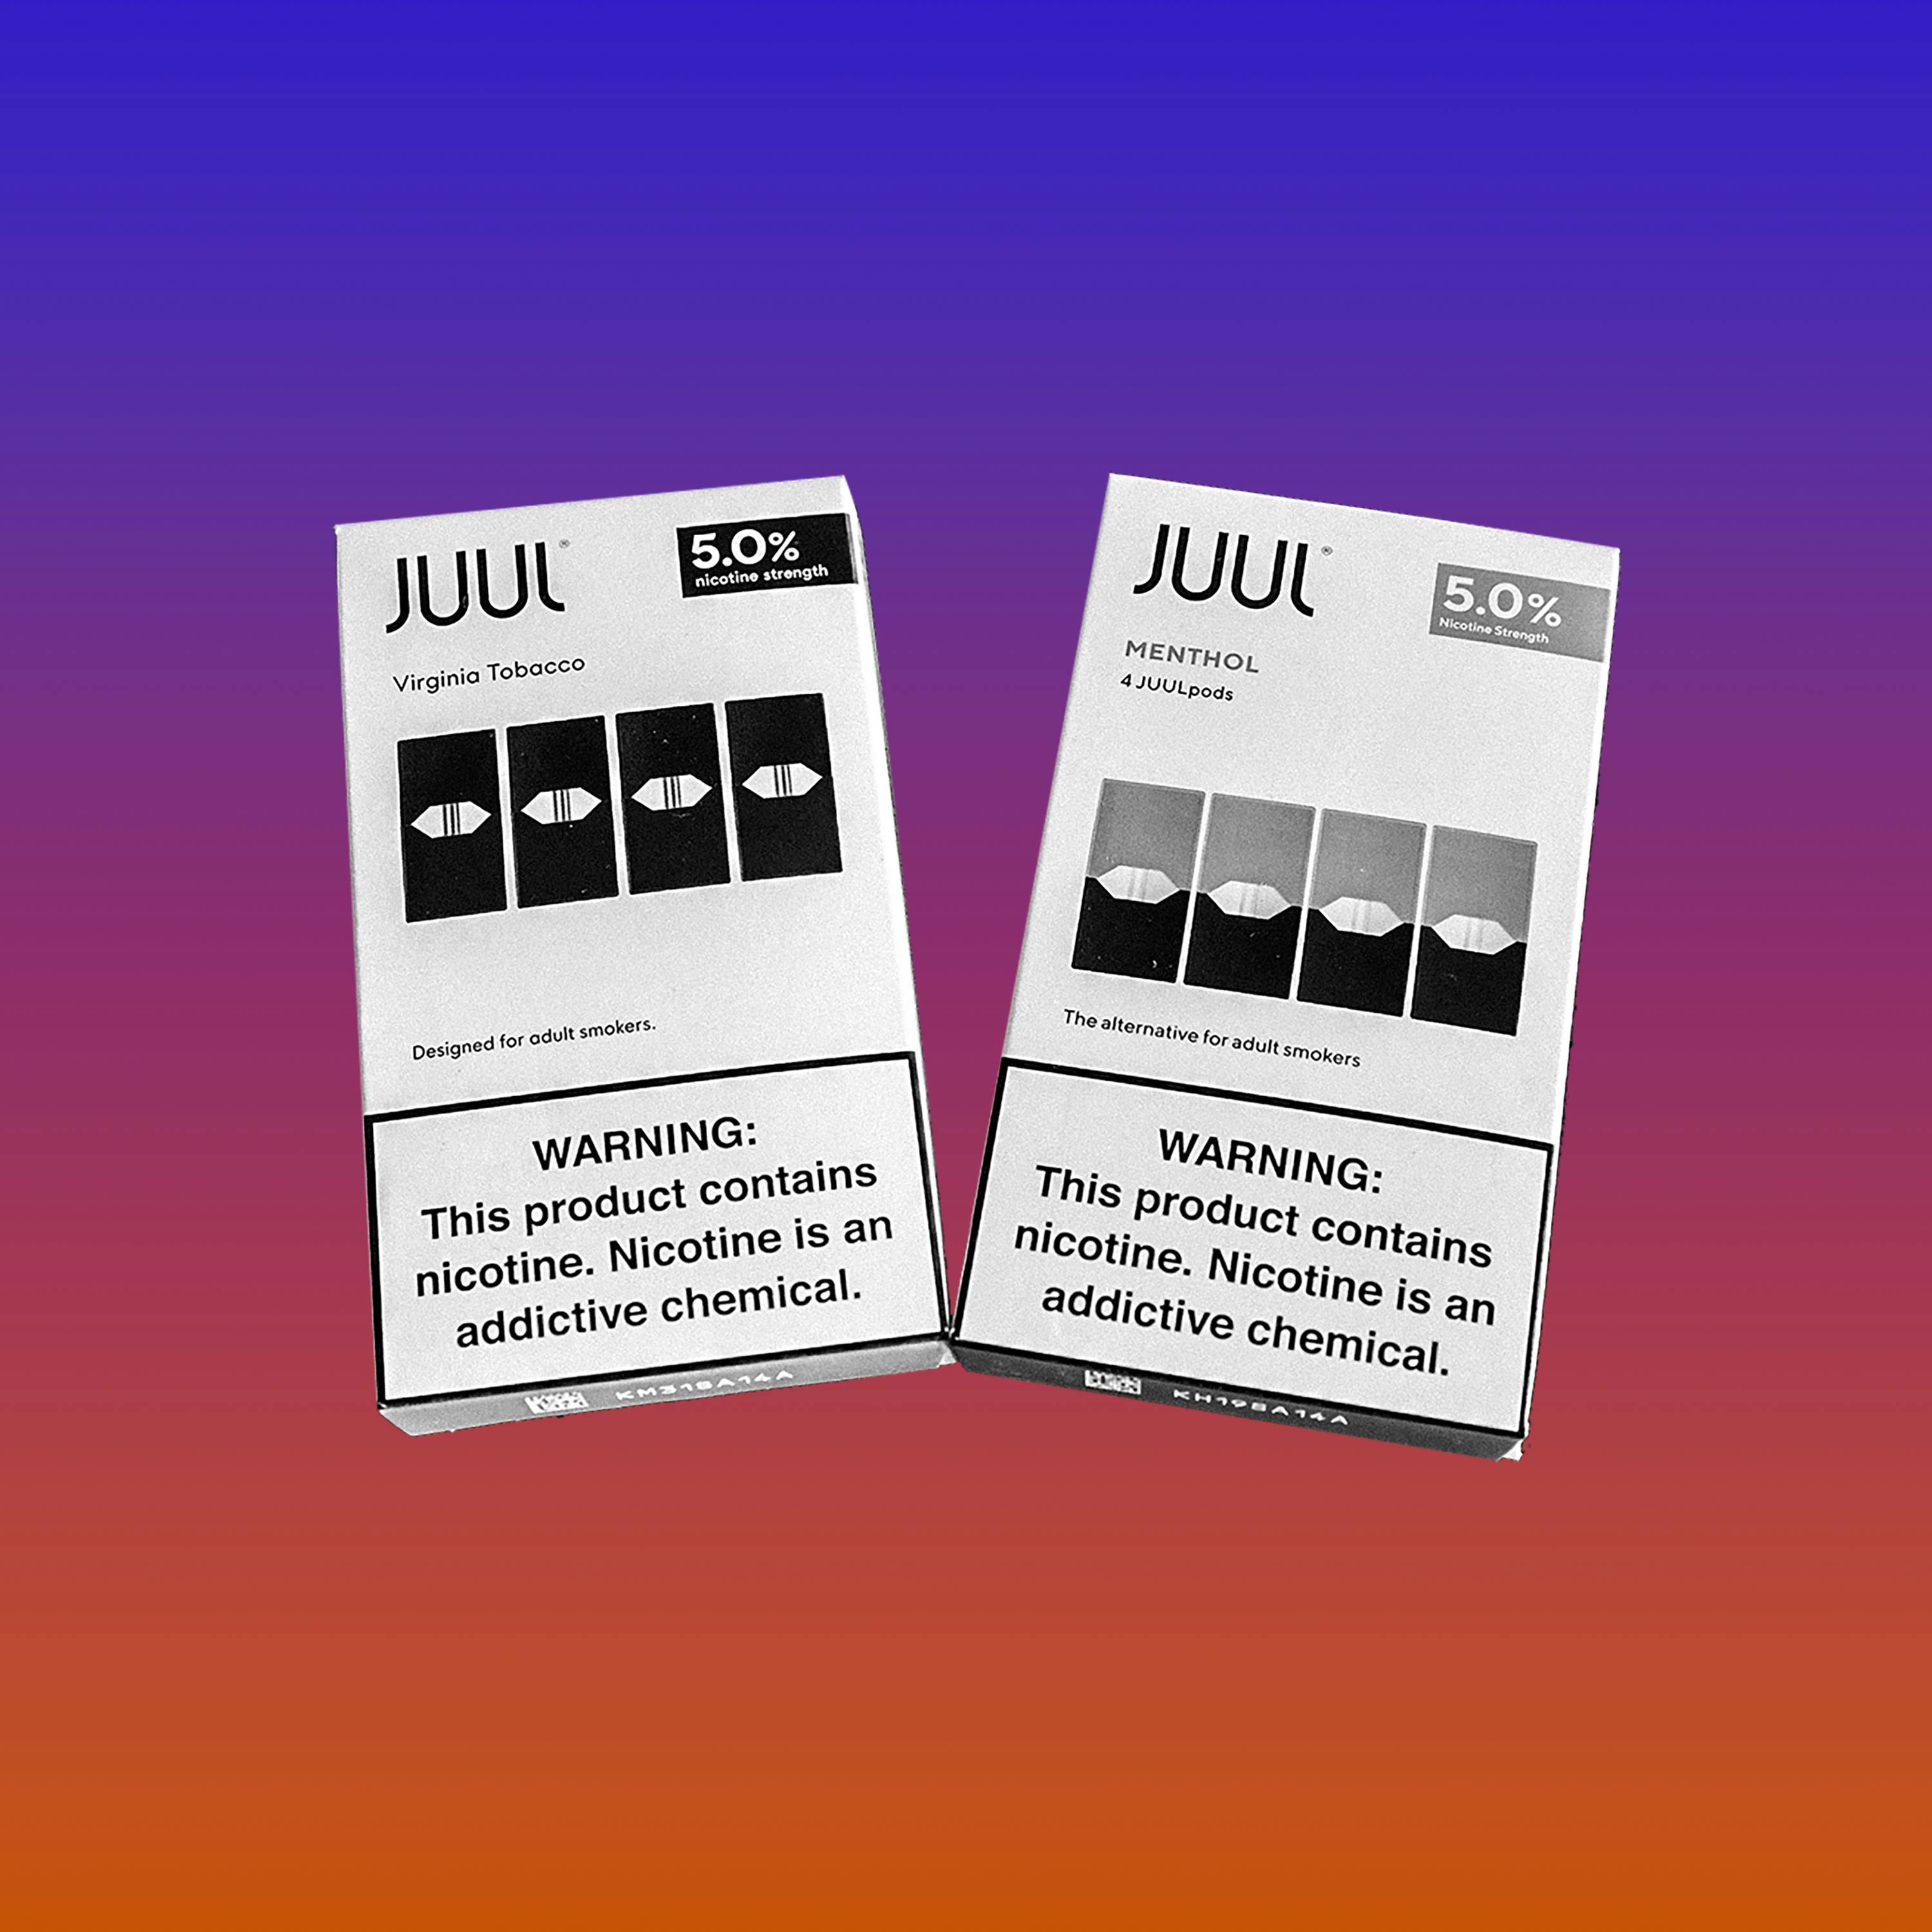 What Next: Wait, Is JUUL Banned or Not?